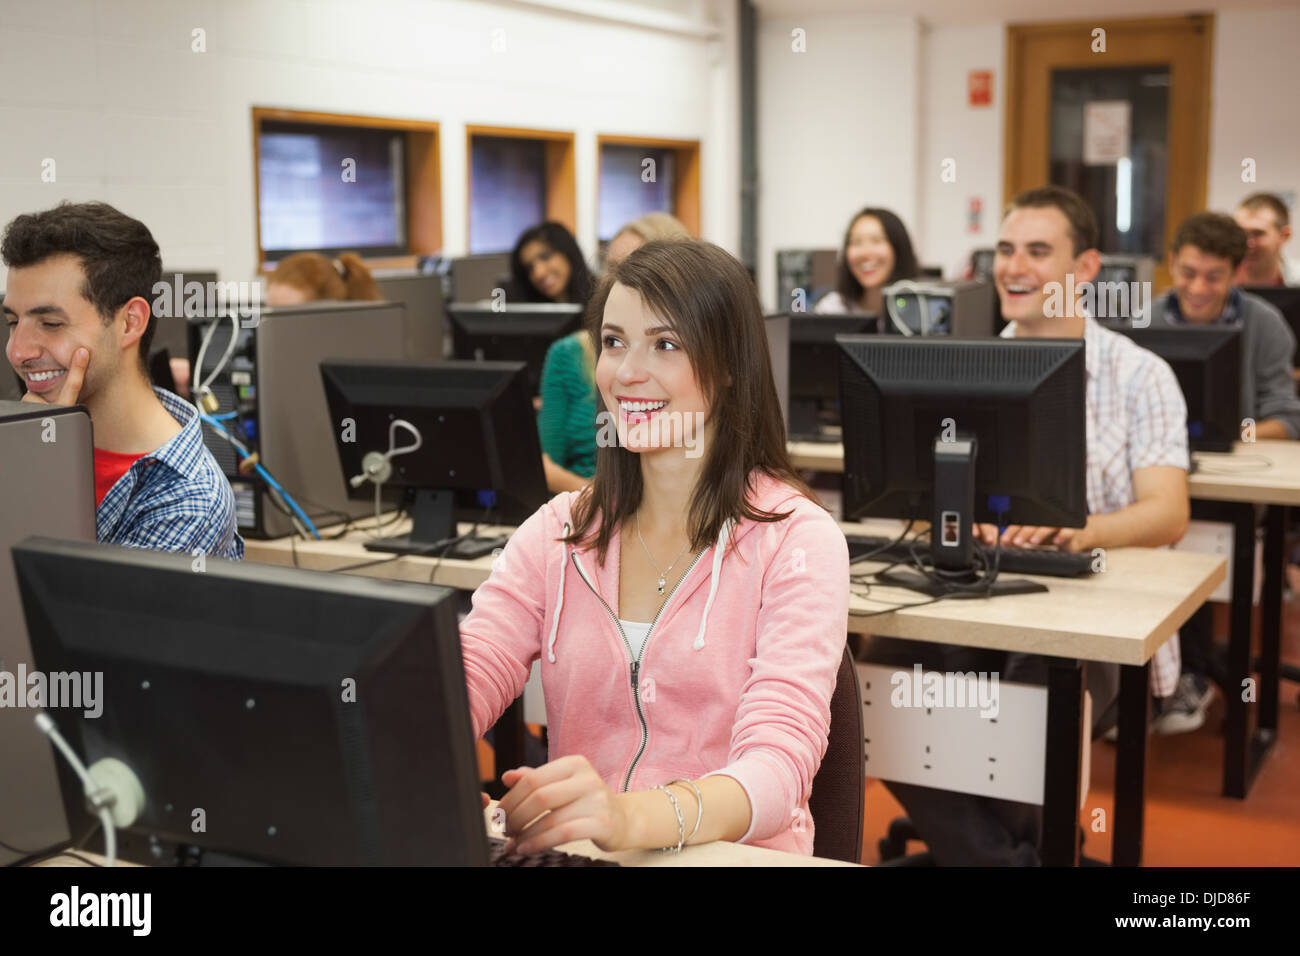 Smiling students listening in their computer class Stock Photo